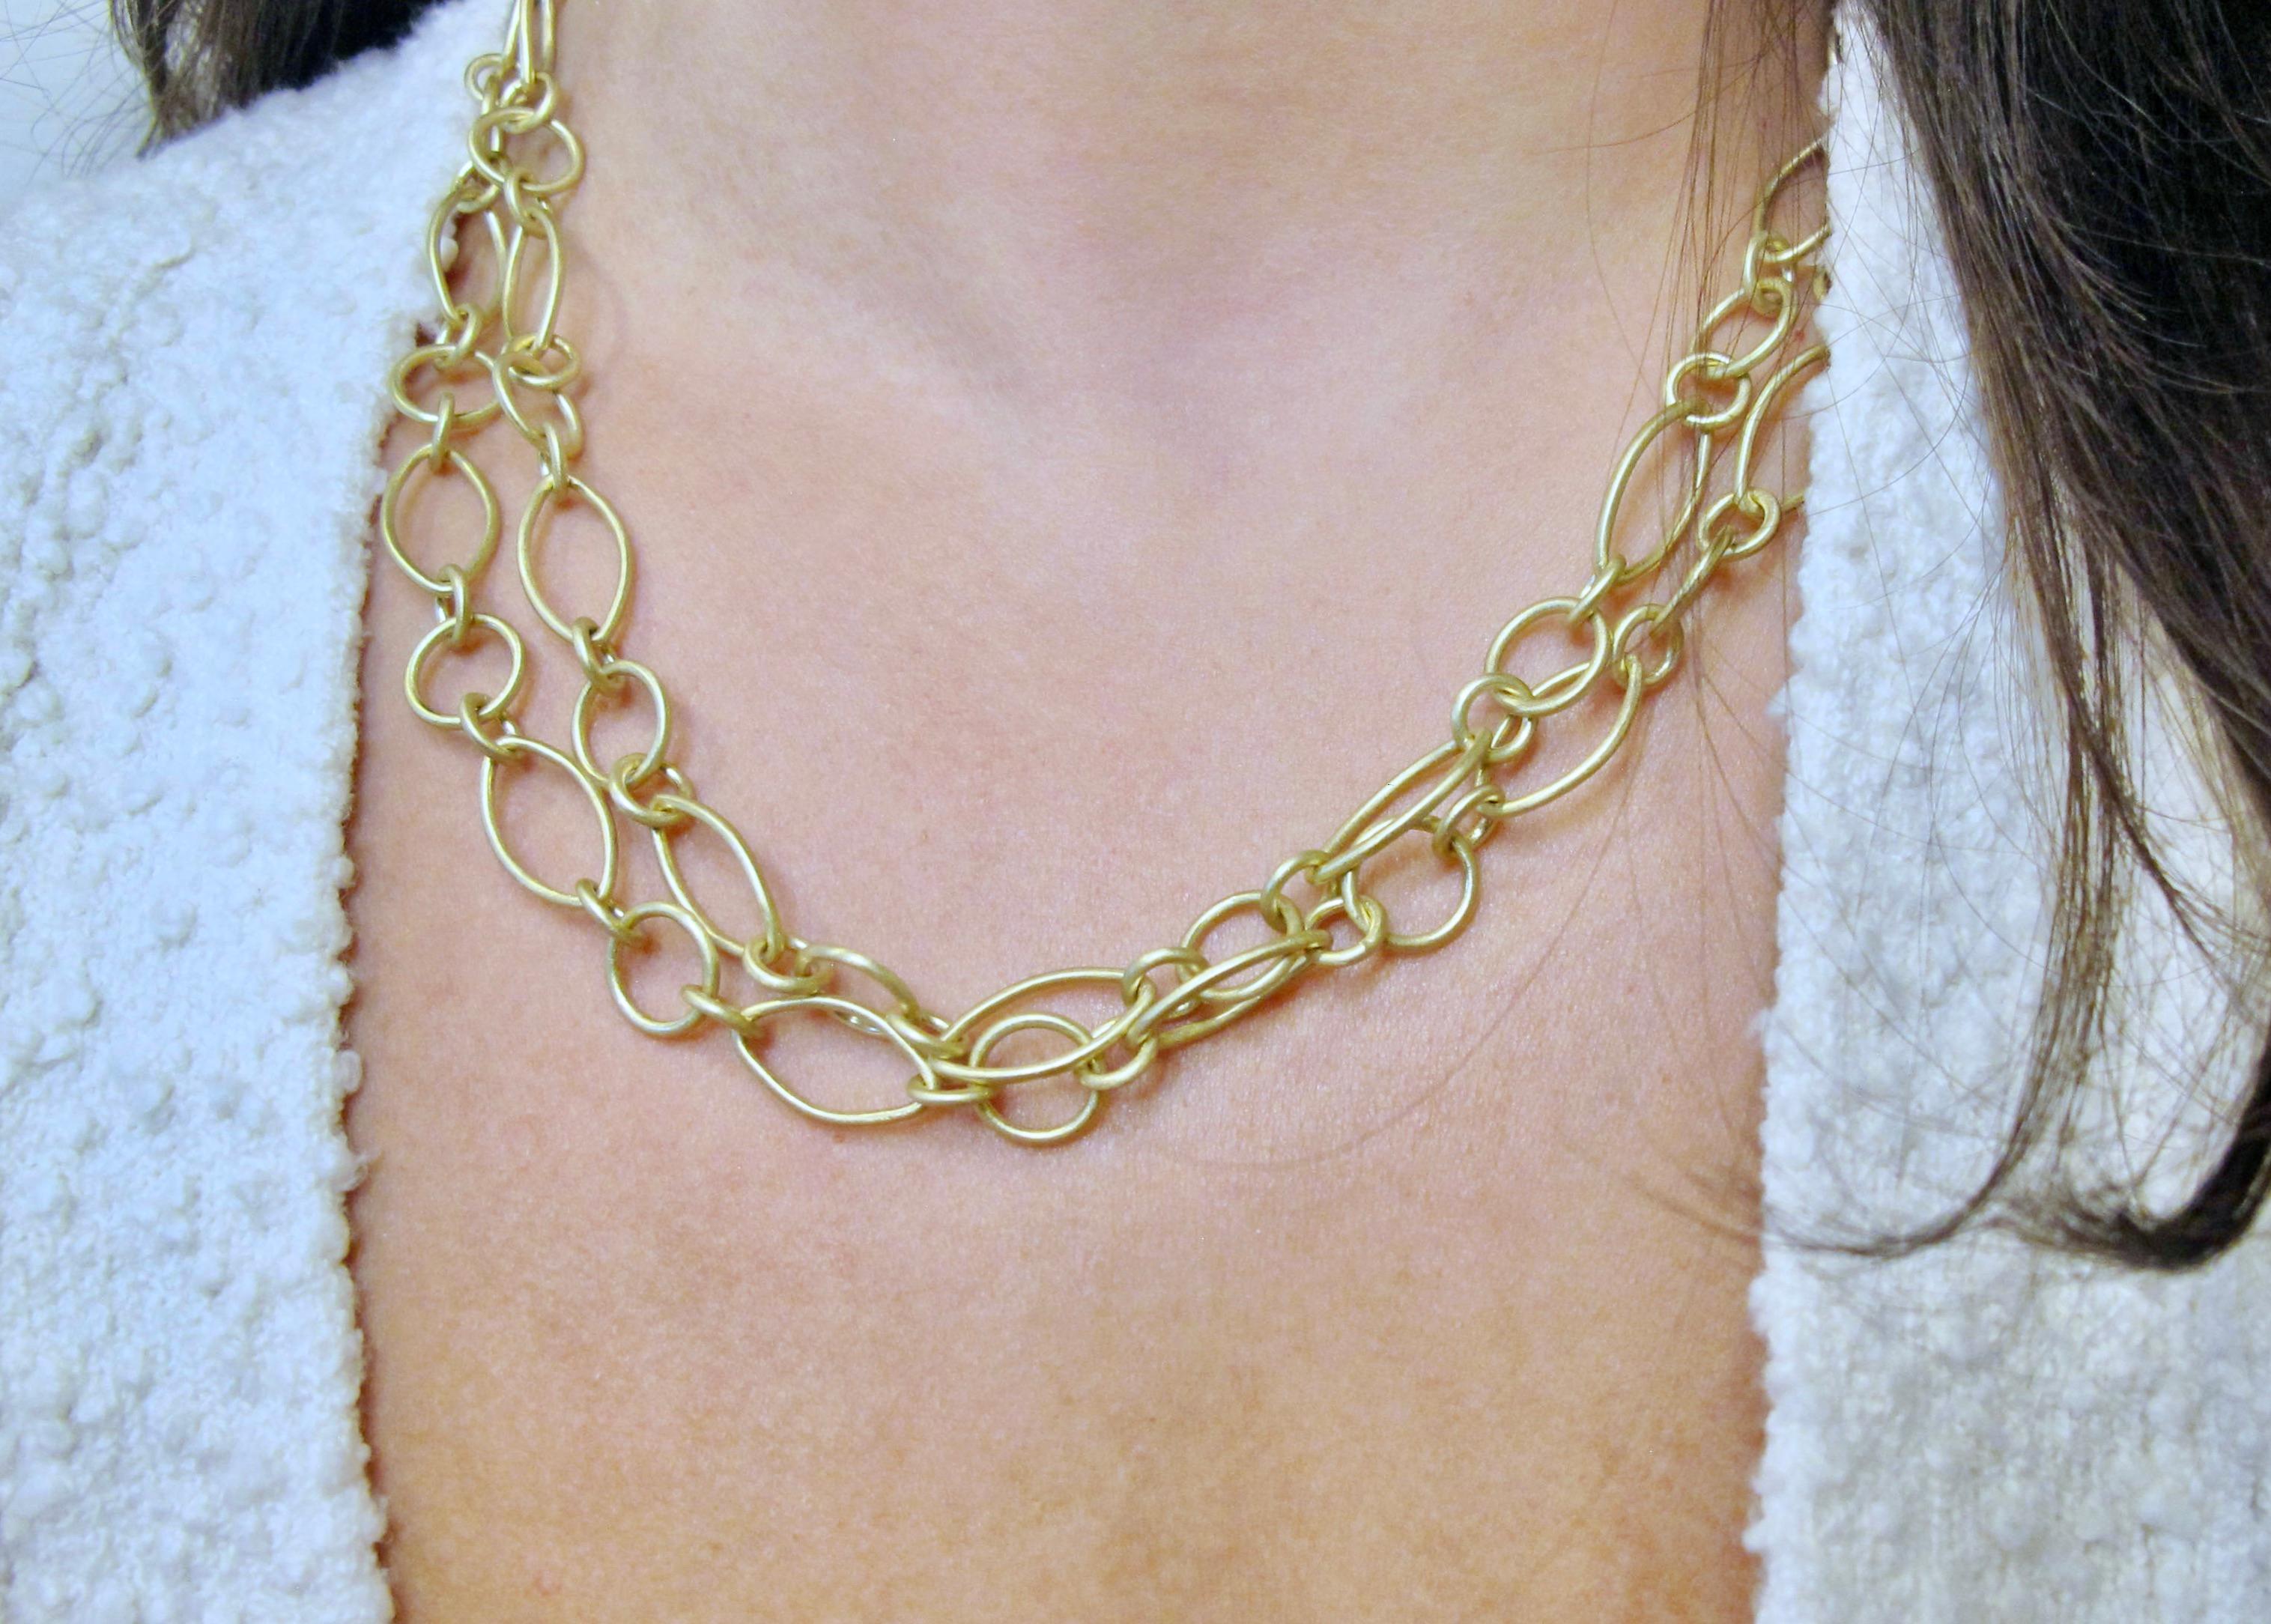 Faye Kim's 18 Karat Handmade Marquise Link Chain is both classic and versatile, and can be a staple in every jewelry wardrobe. Alternating mixed shaped matte-finished links give texture and uniqueness to this chain, bringing it to a whole new level.